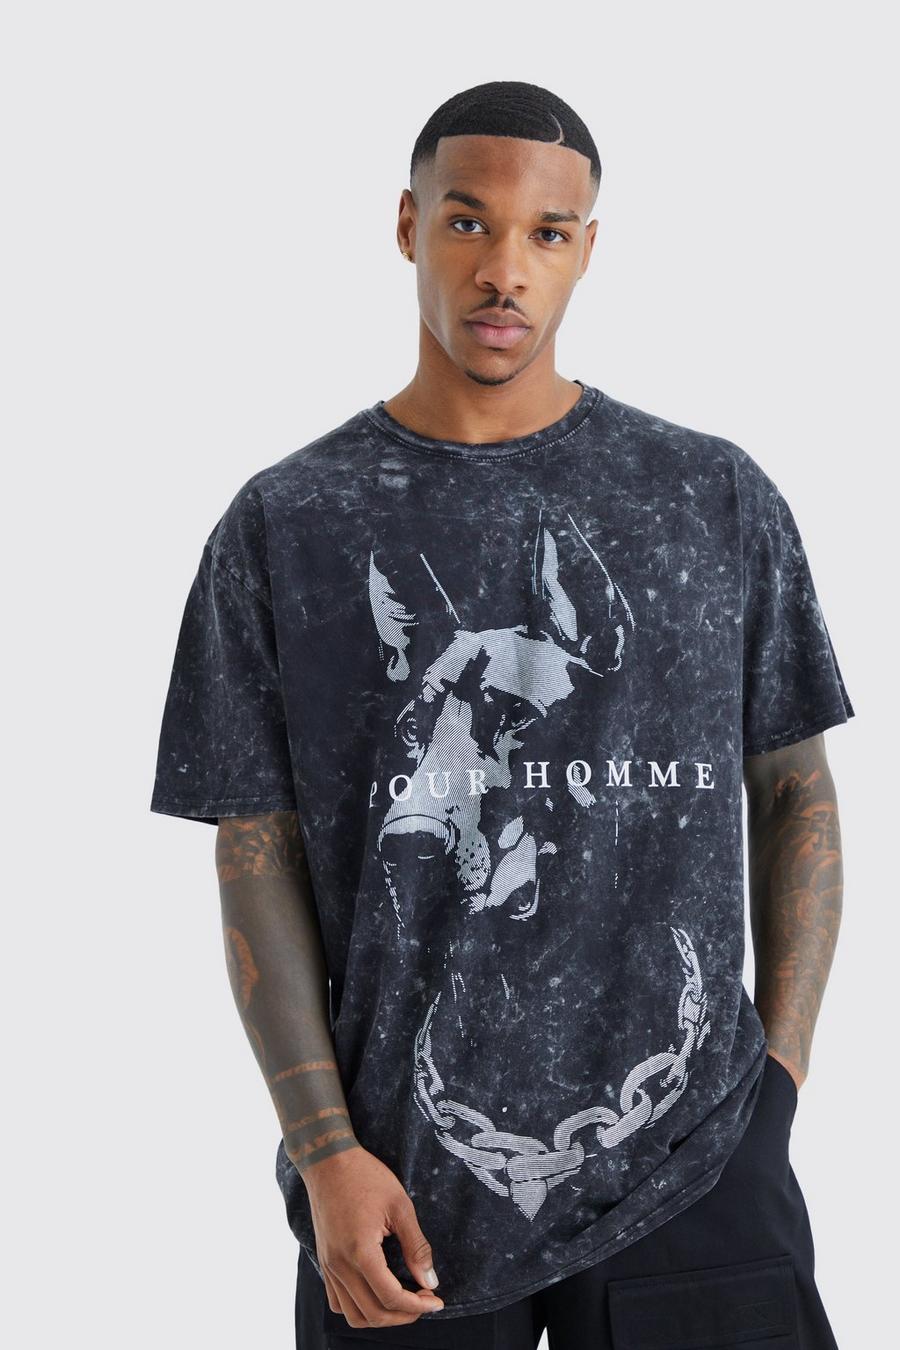 Charcoal grey Oversized Homme Dog Graphic Wash T-shirt